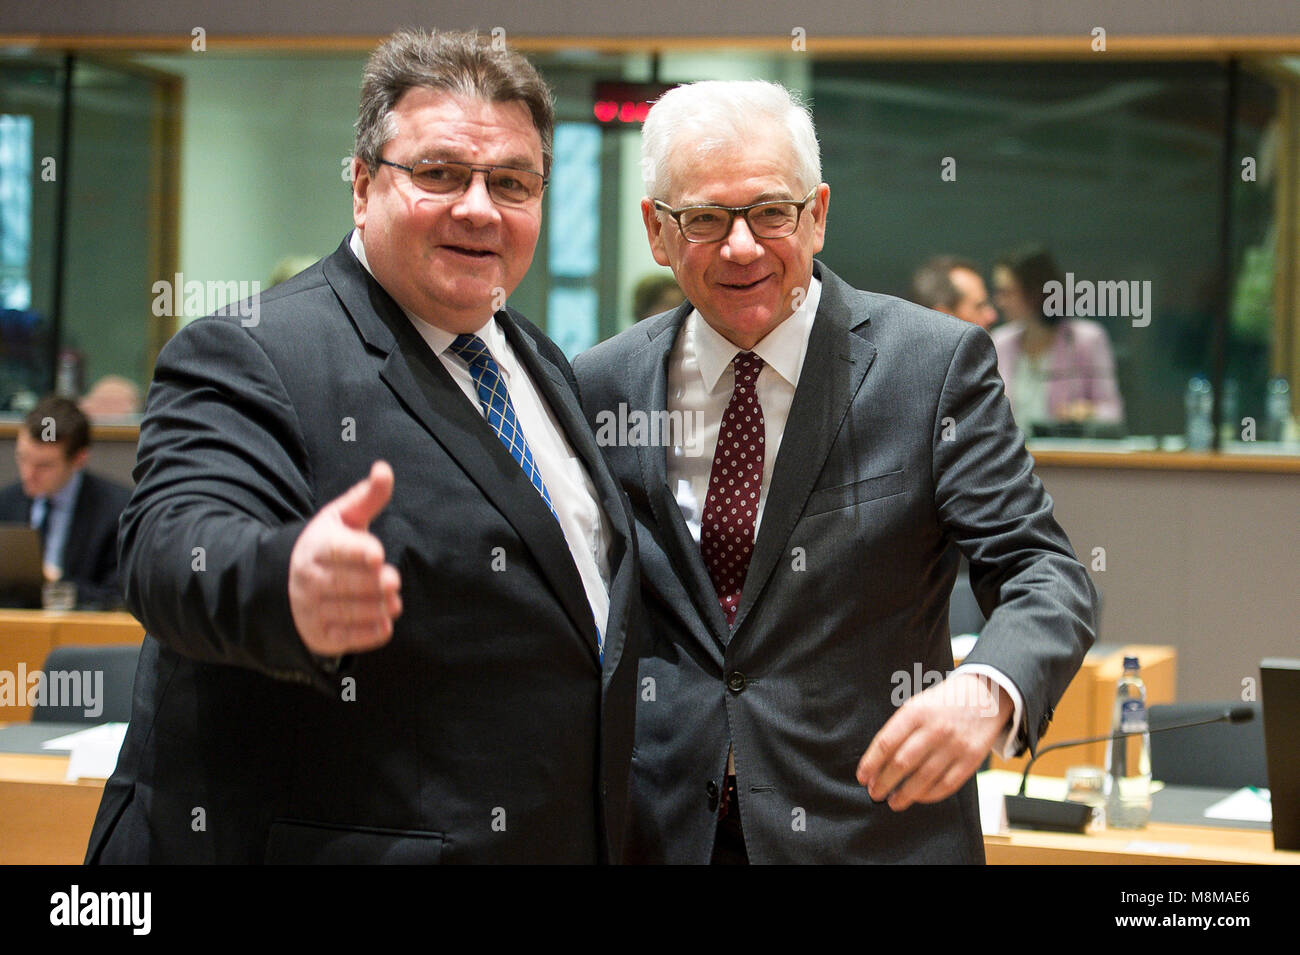 Brussels, Belgium. 19th Mar, 2018. Lithuanian Foreign Minister Linas Antanas Linkevi?ius (L) and Jacek Czaputowicz, Polish Foreign Minister at the start of FAC the EU Foreign Ministers Council at European Council headquarters in Brussels, Belgium on 19.03.2018 by Wiktor Dabkowski | usage worldwide Credit: dpa/Alamy Live News Stock Photo